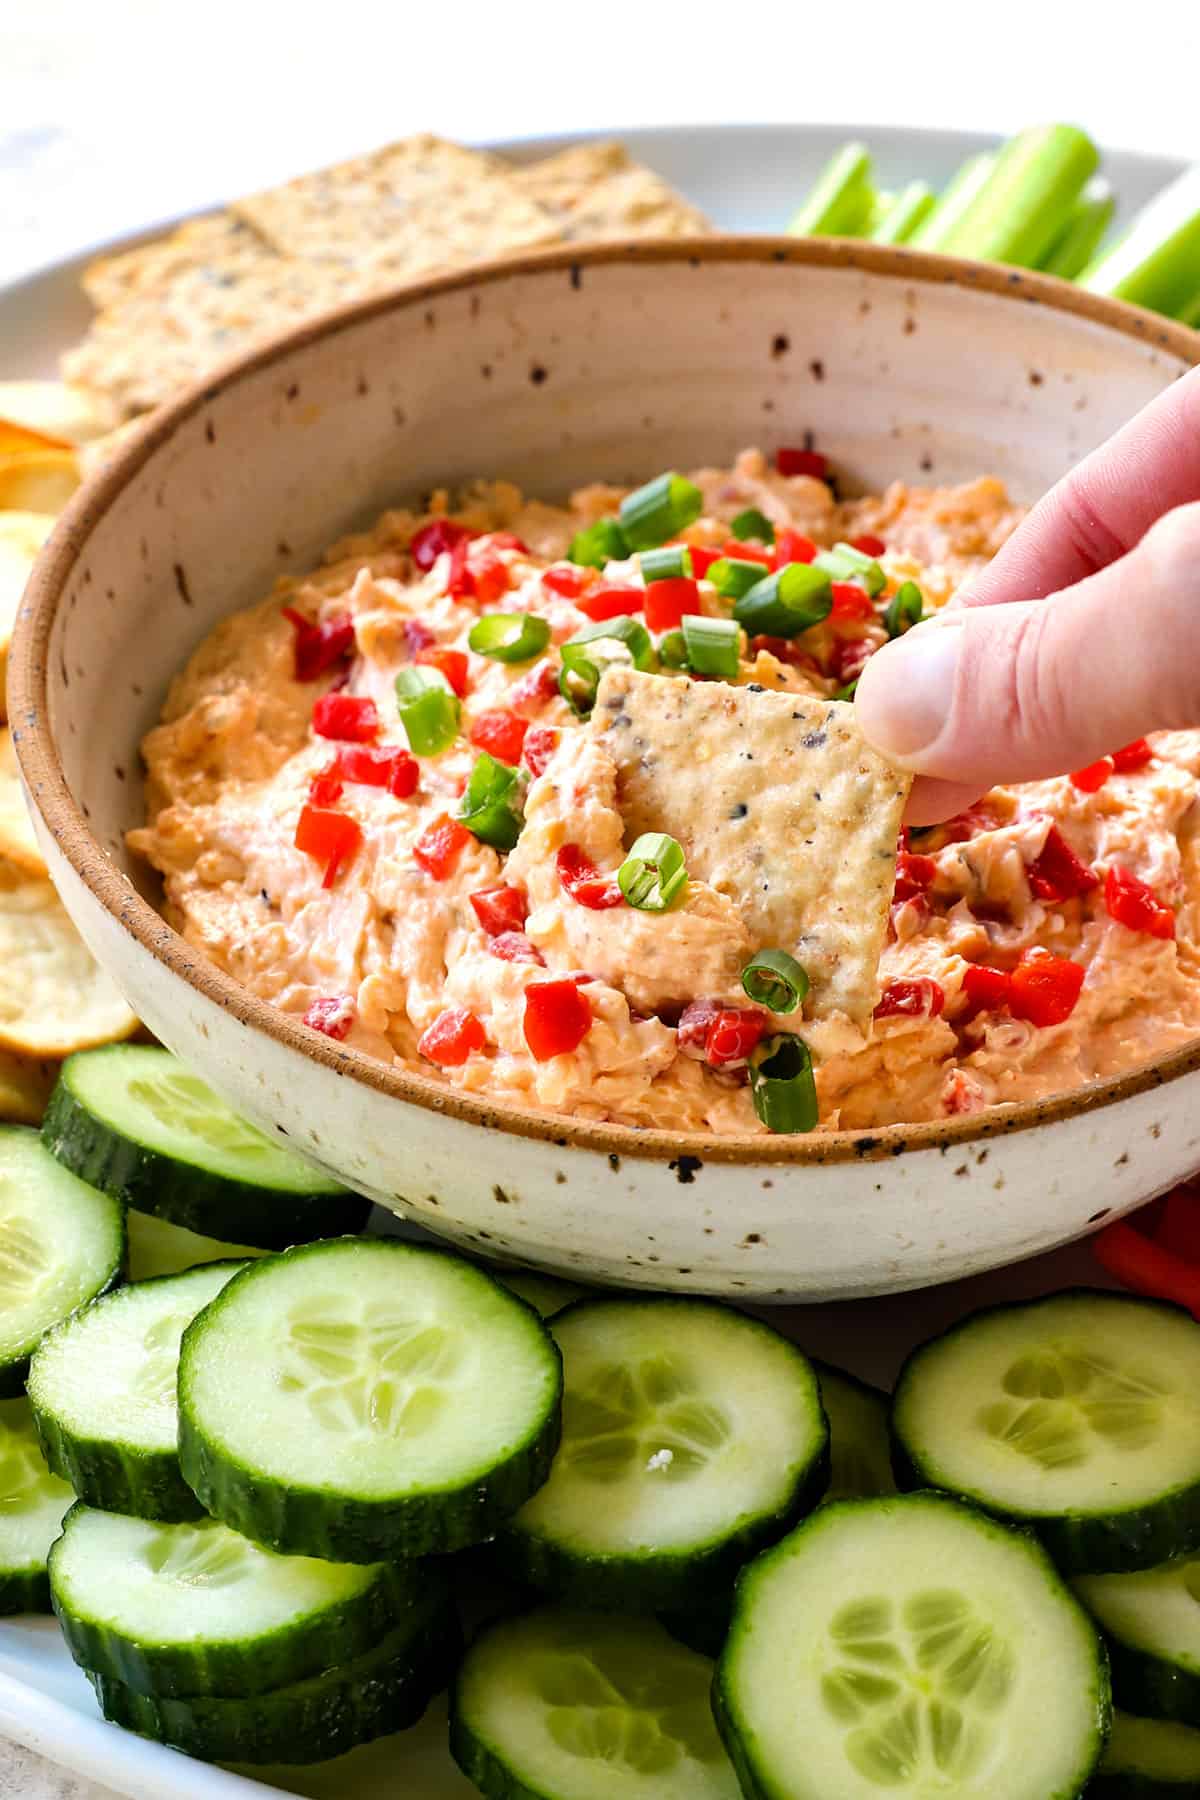 showing how to serve pimento cheese by dipping a cracker into the cheese